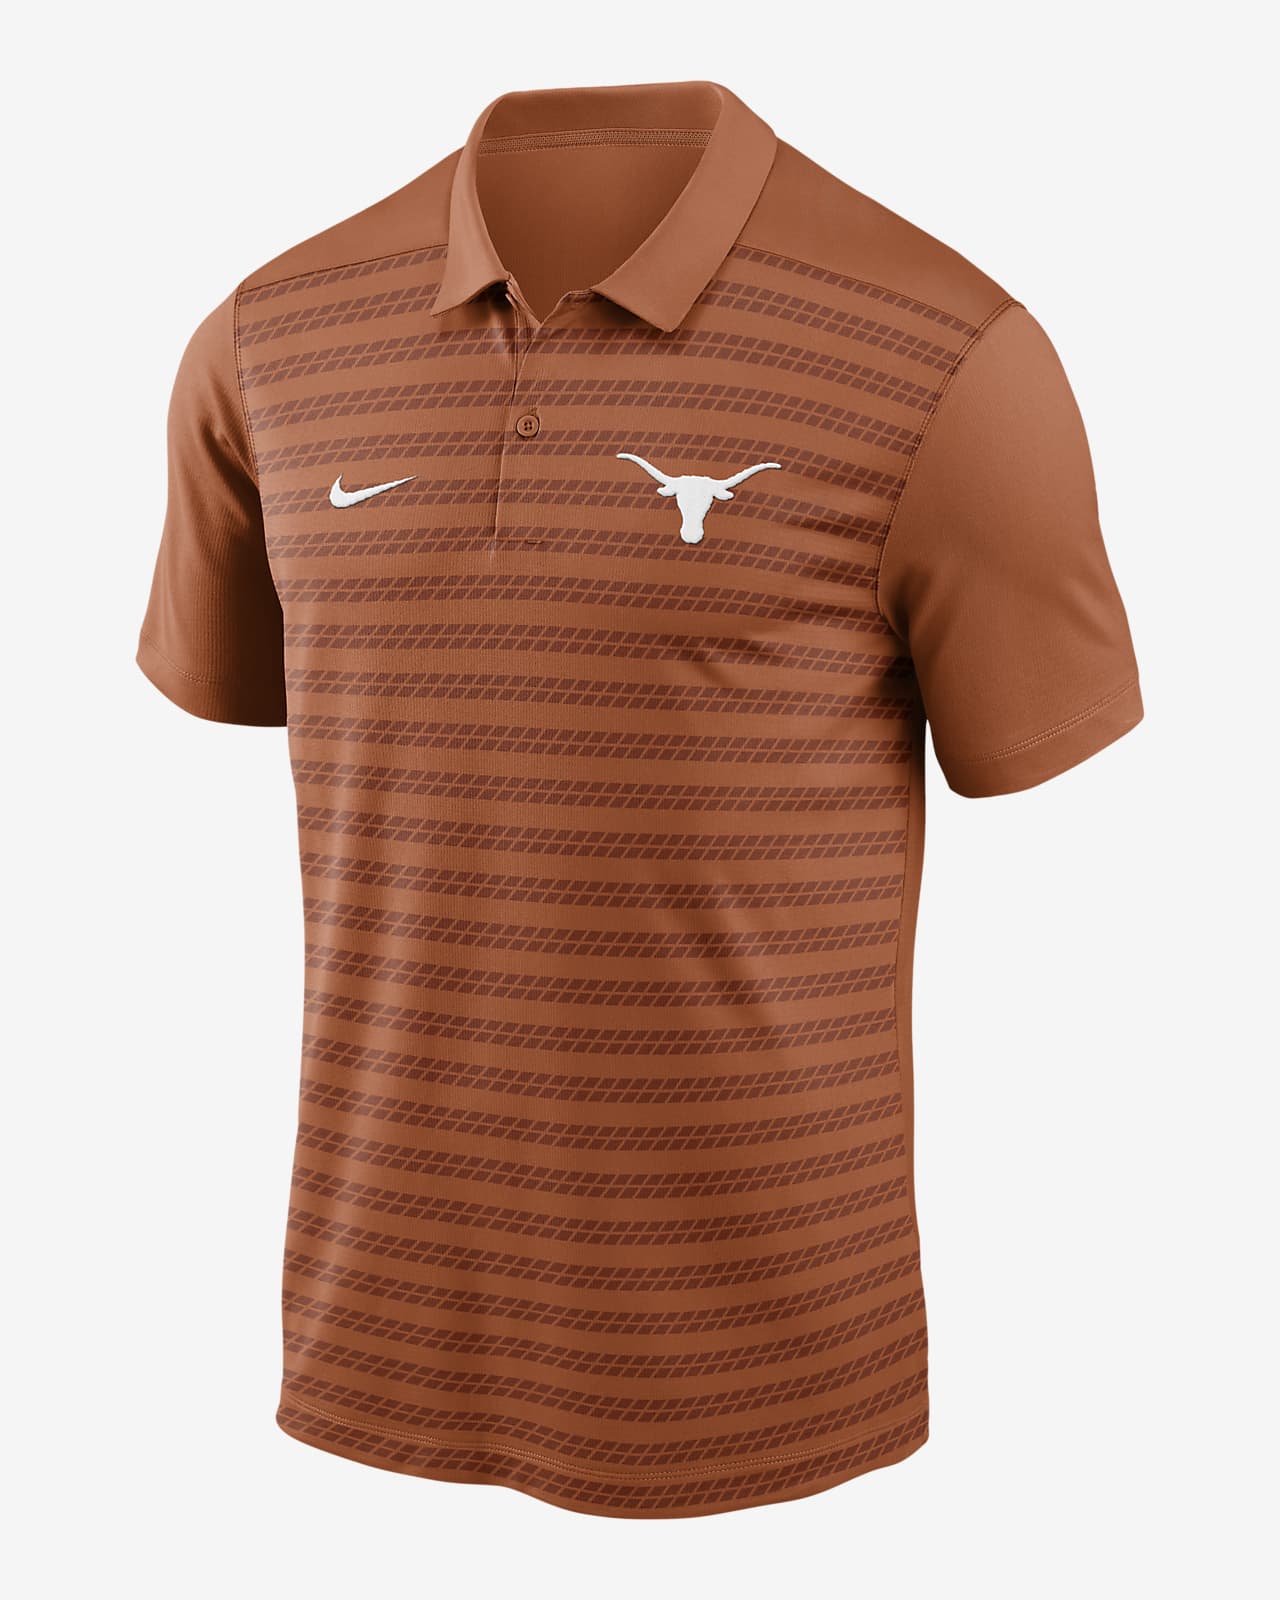 Texas Longhorns Sideline Victory Men's Nike Dri-FIT College Polo